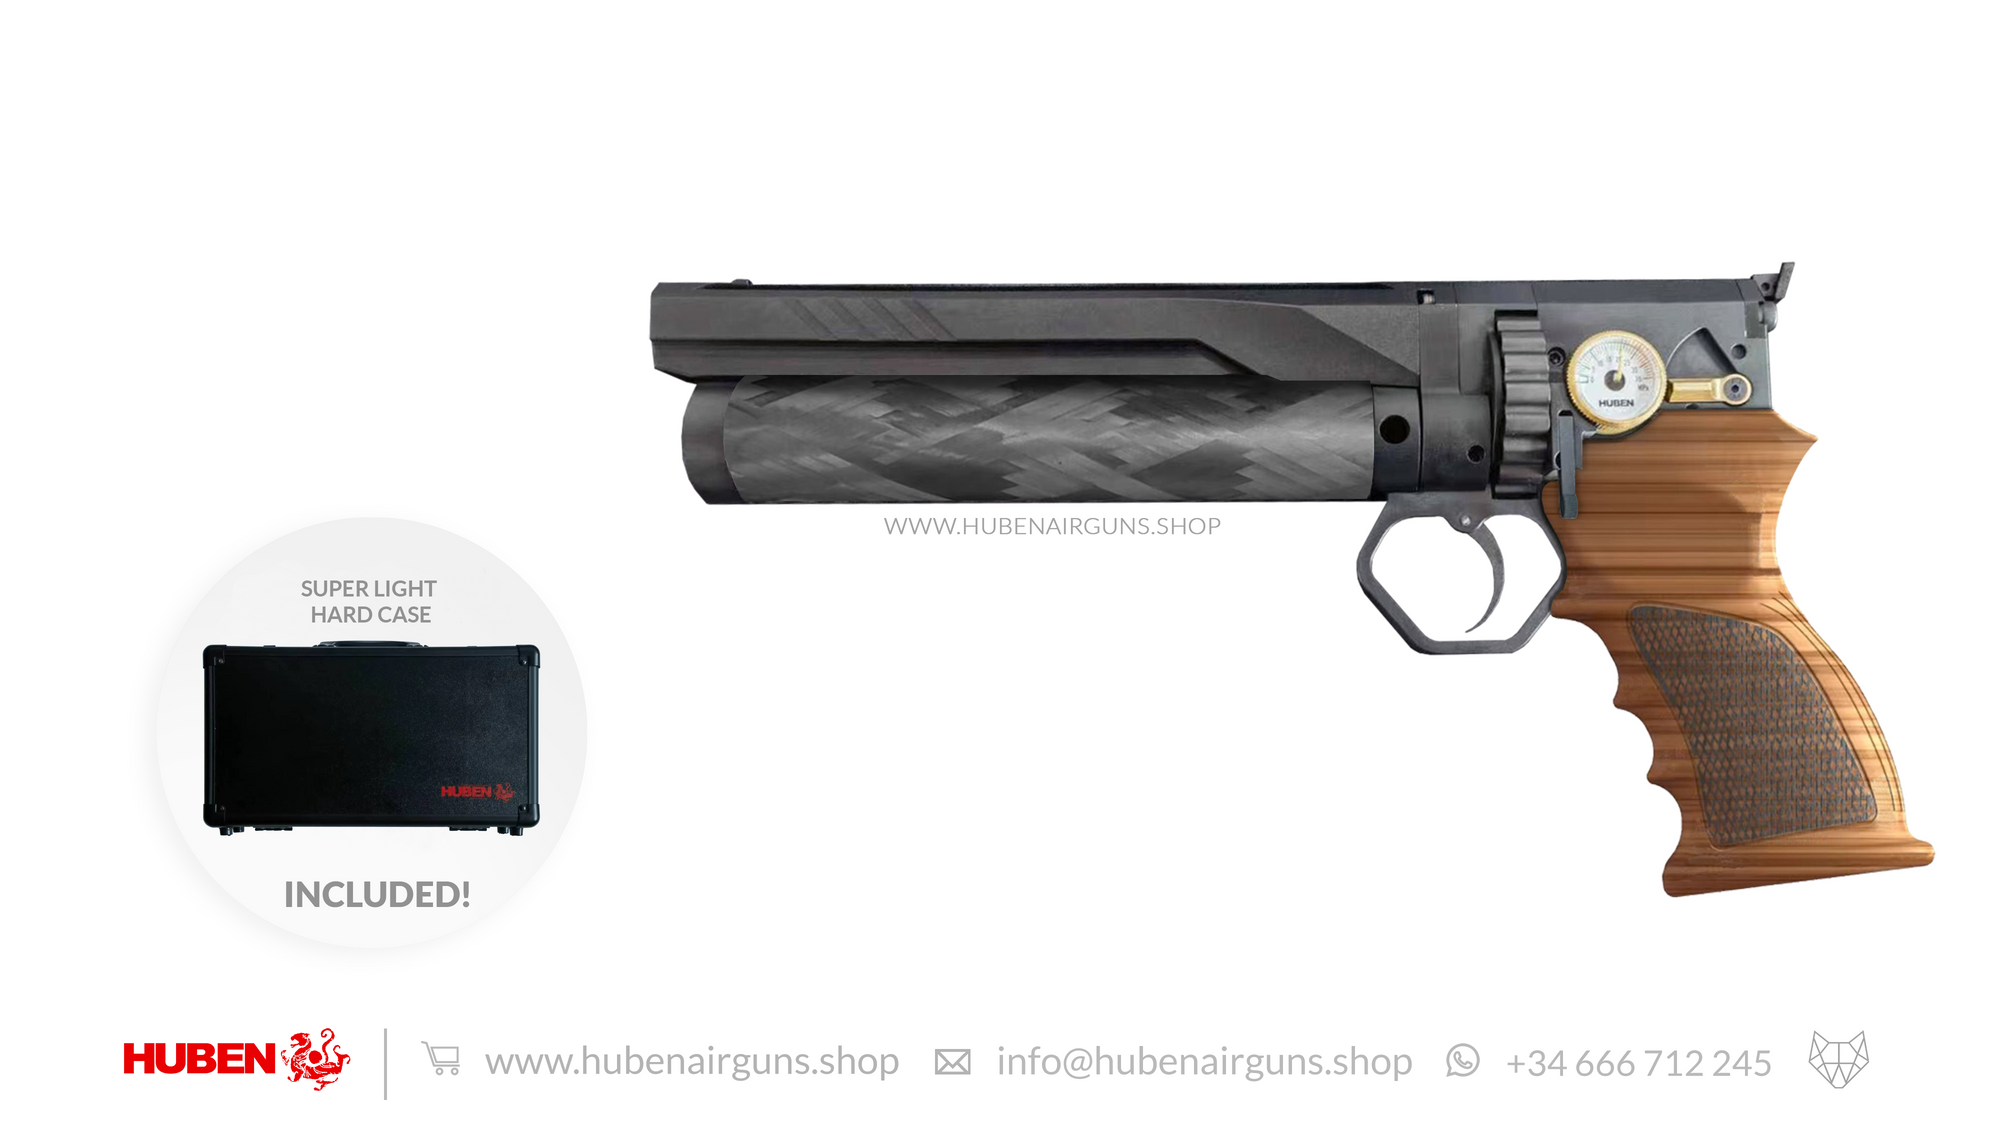 Huben Pistol GK1 black with walnut handle and black case included.